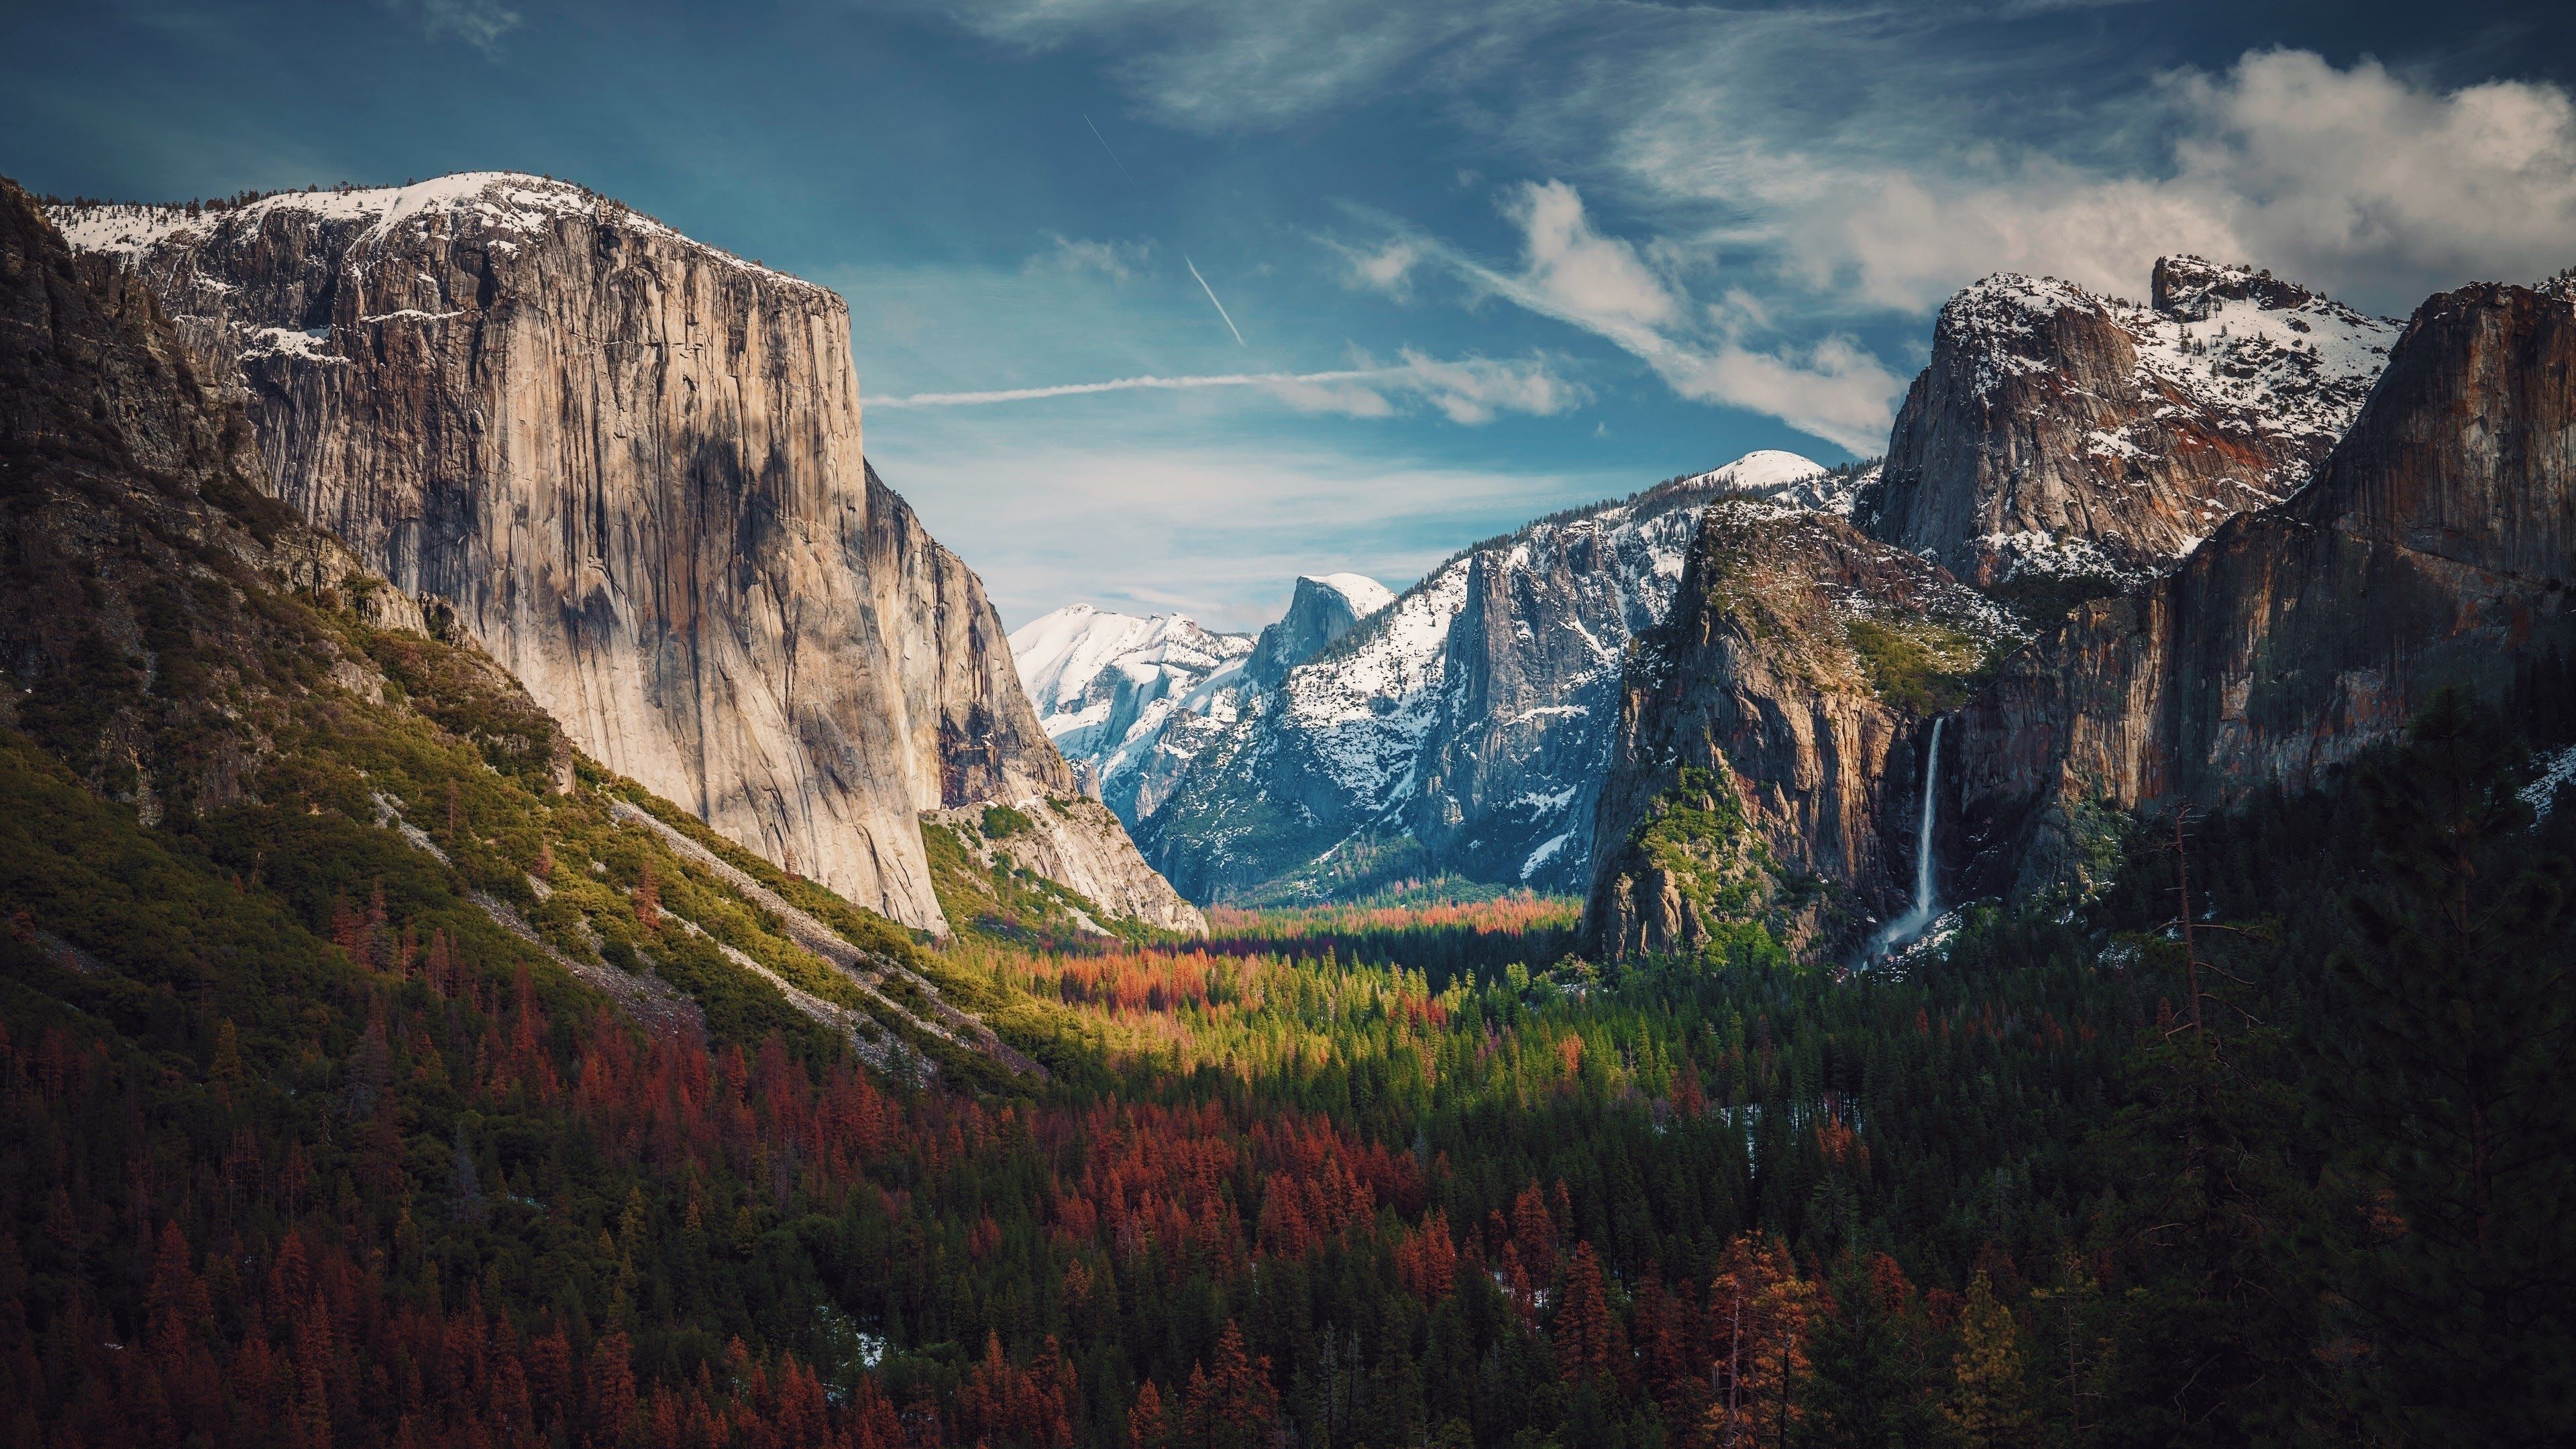 Download wallpaper Yosemite Valley, 4k, Yosemite National Park, autumn, forest, California, USA for desktop with resolution 3840x2160. High Quality HD picture wallpaper